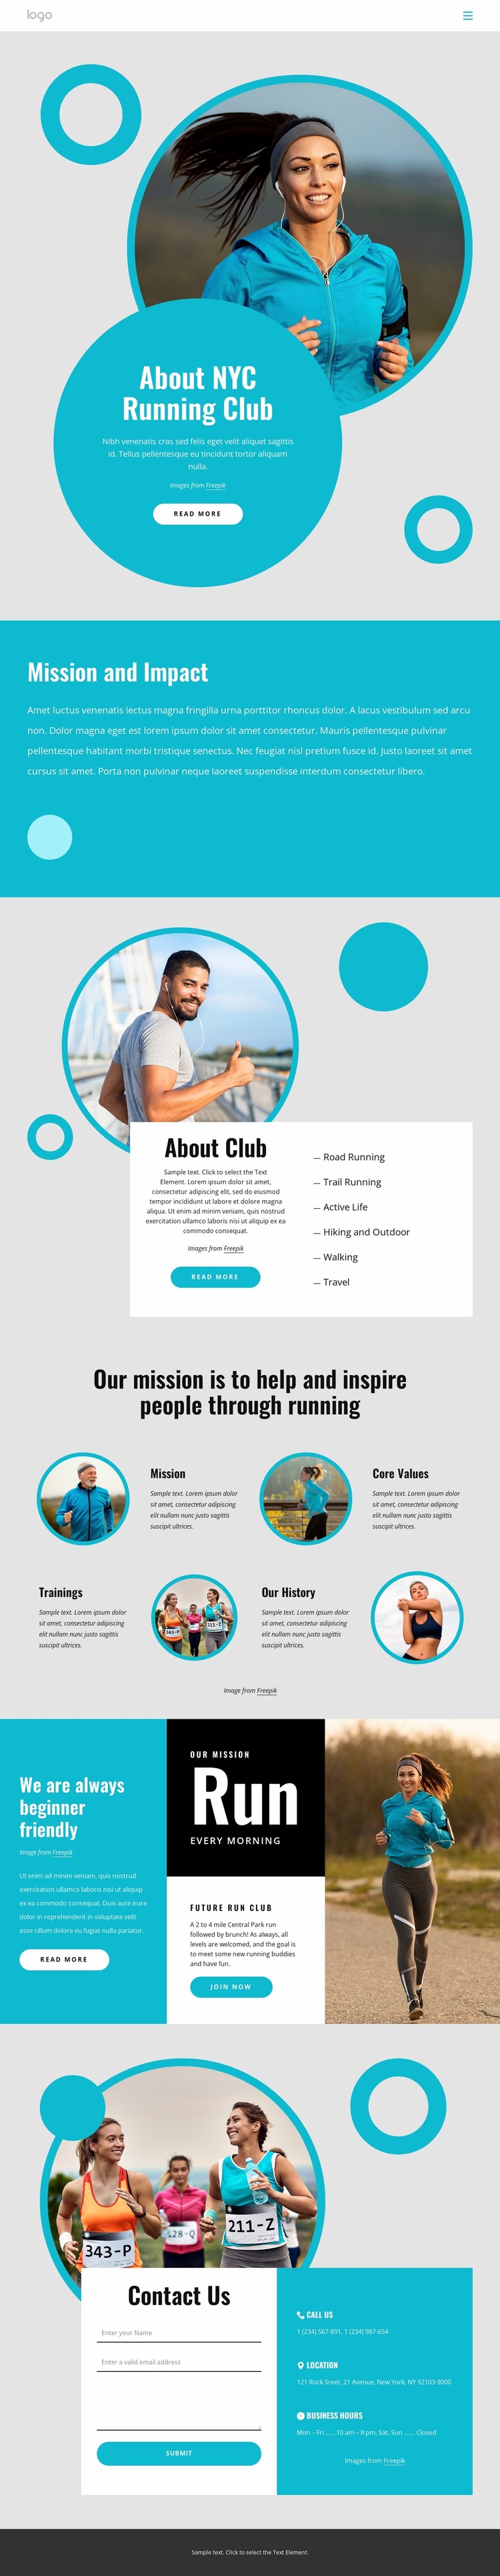 About NYC running club Website Mockup